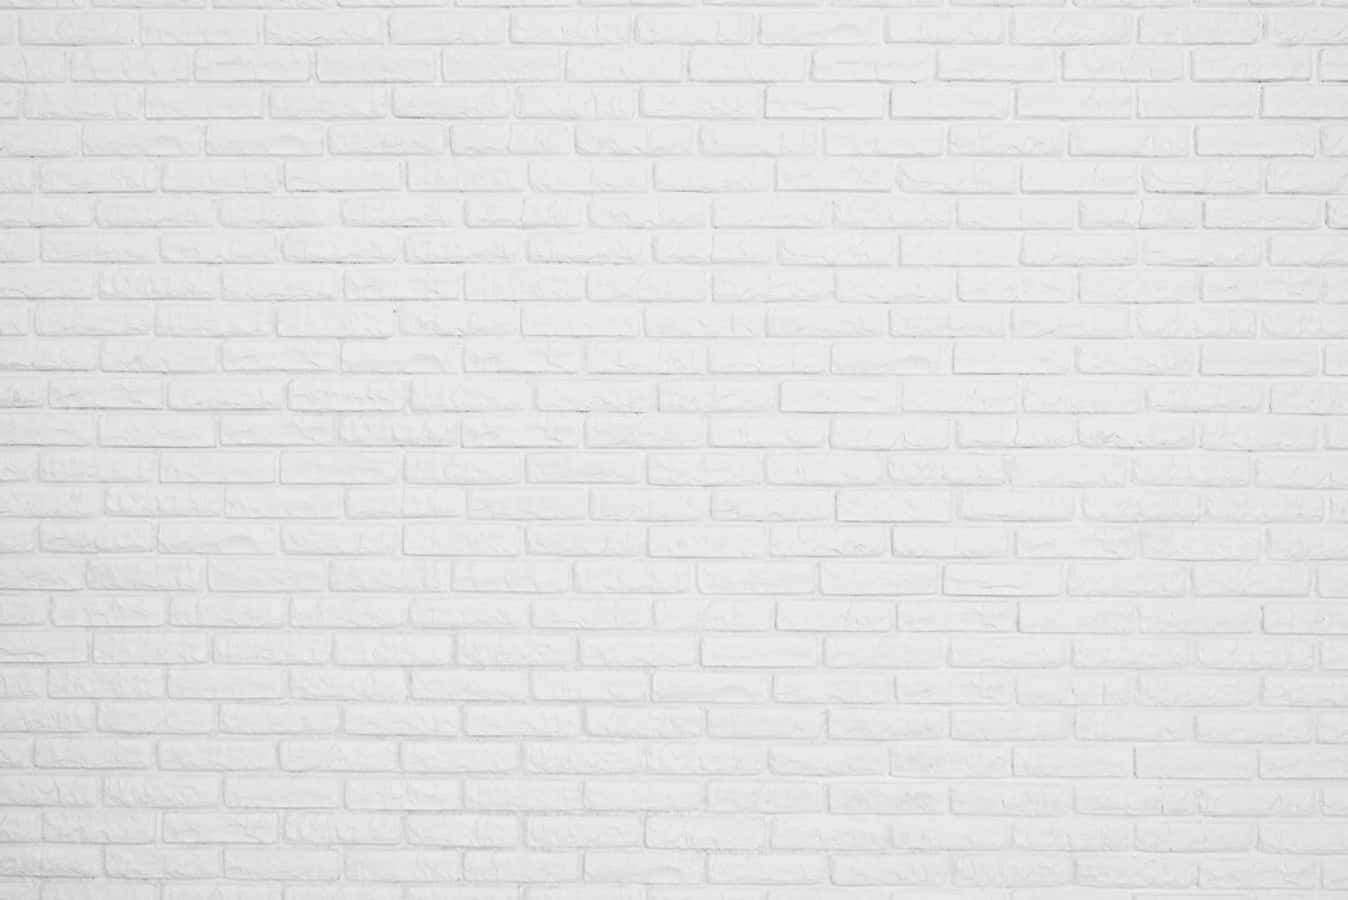 White brick wall with a textured, industrial feel